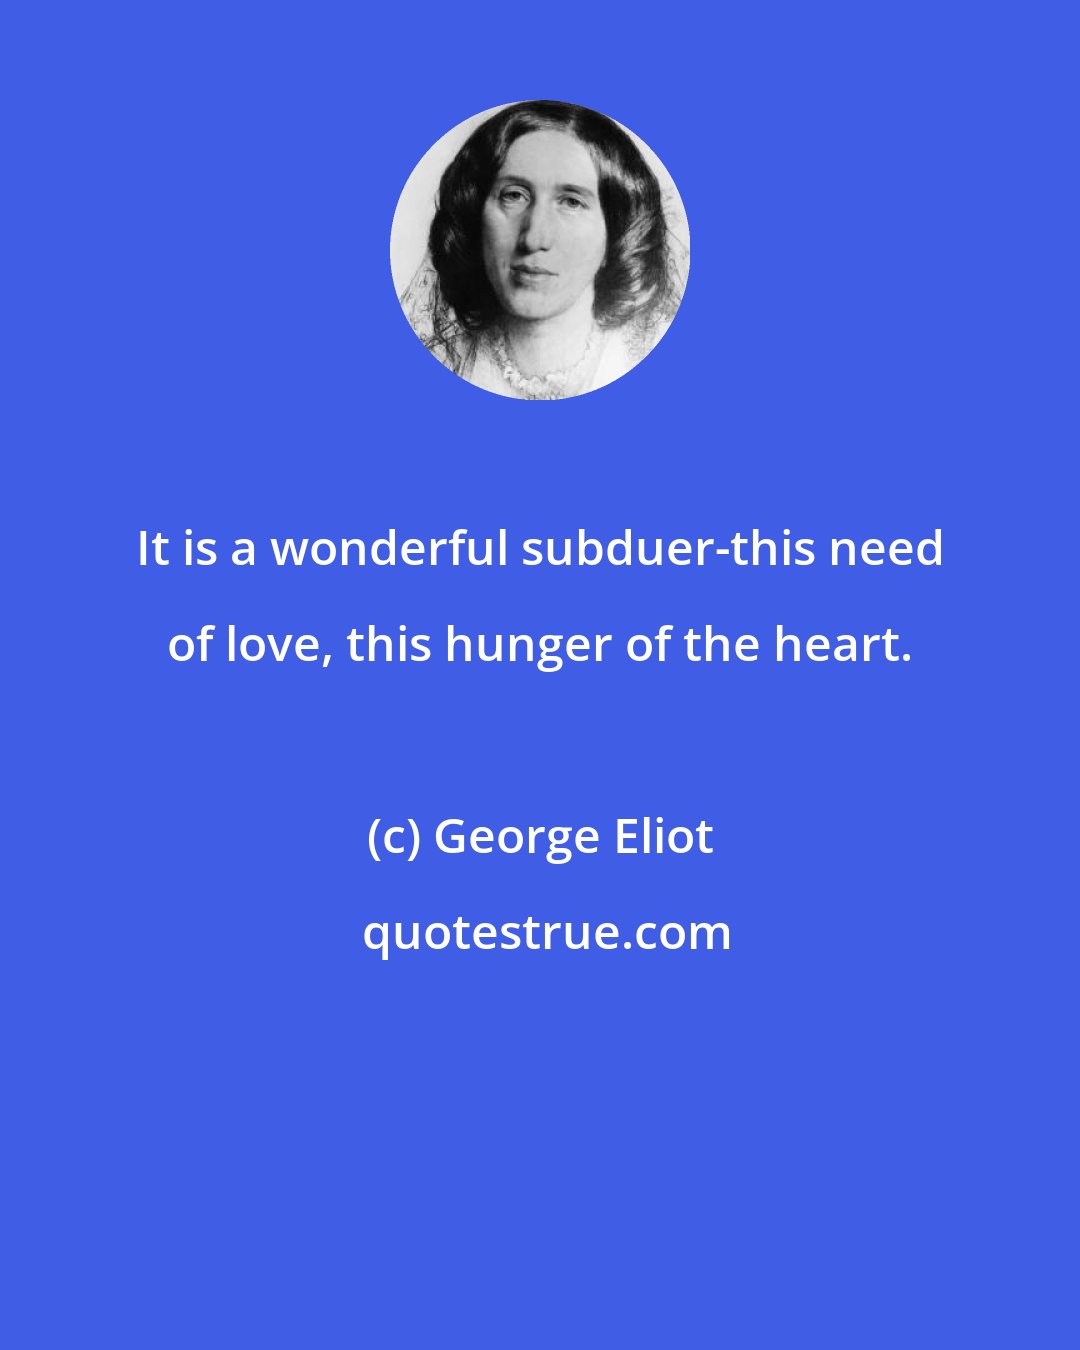 George Eliot: It is a wonderful subduer-this need of love, this hunger of the heart.